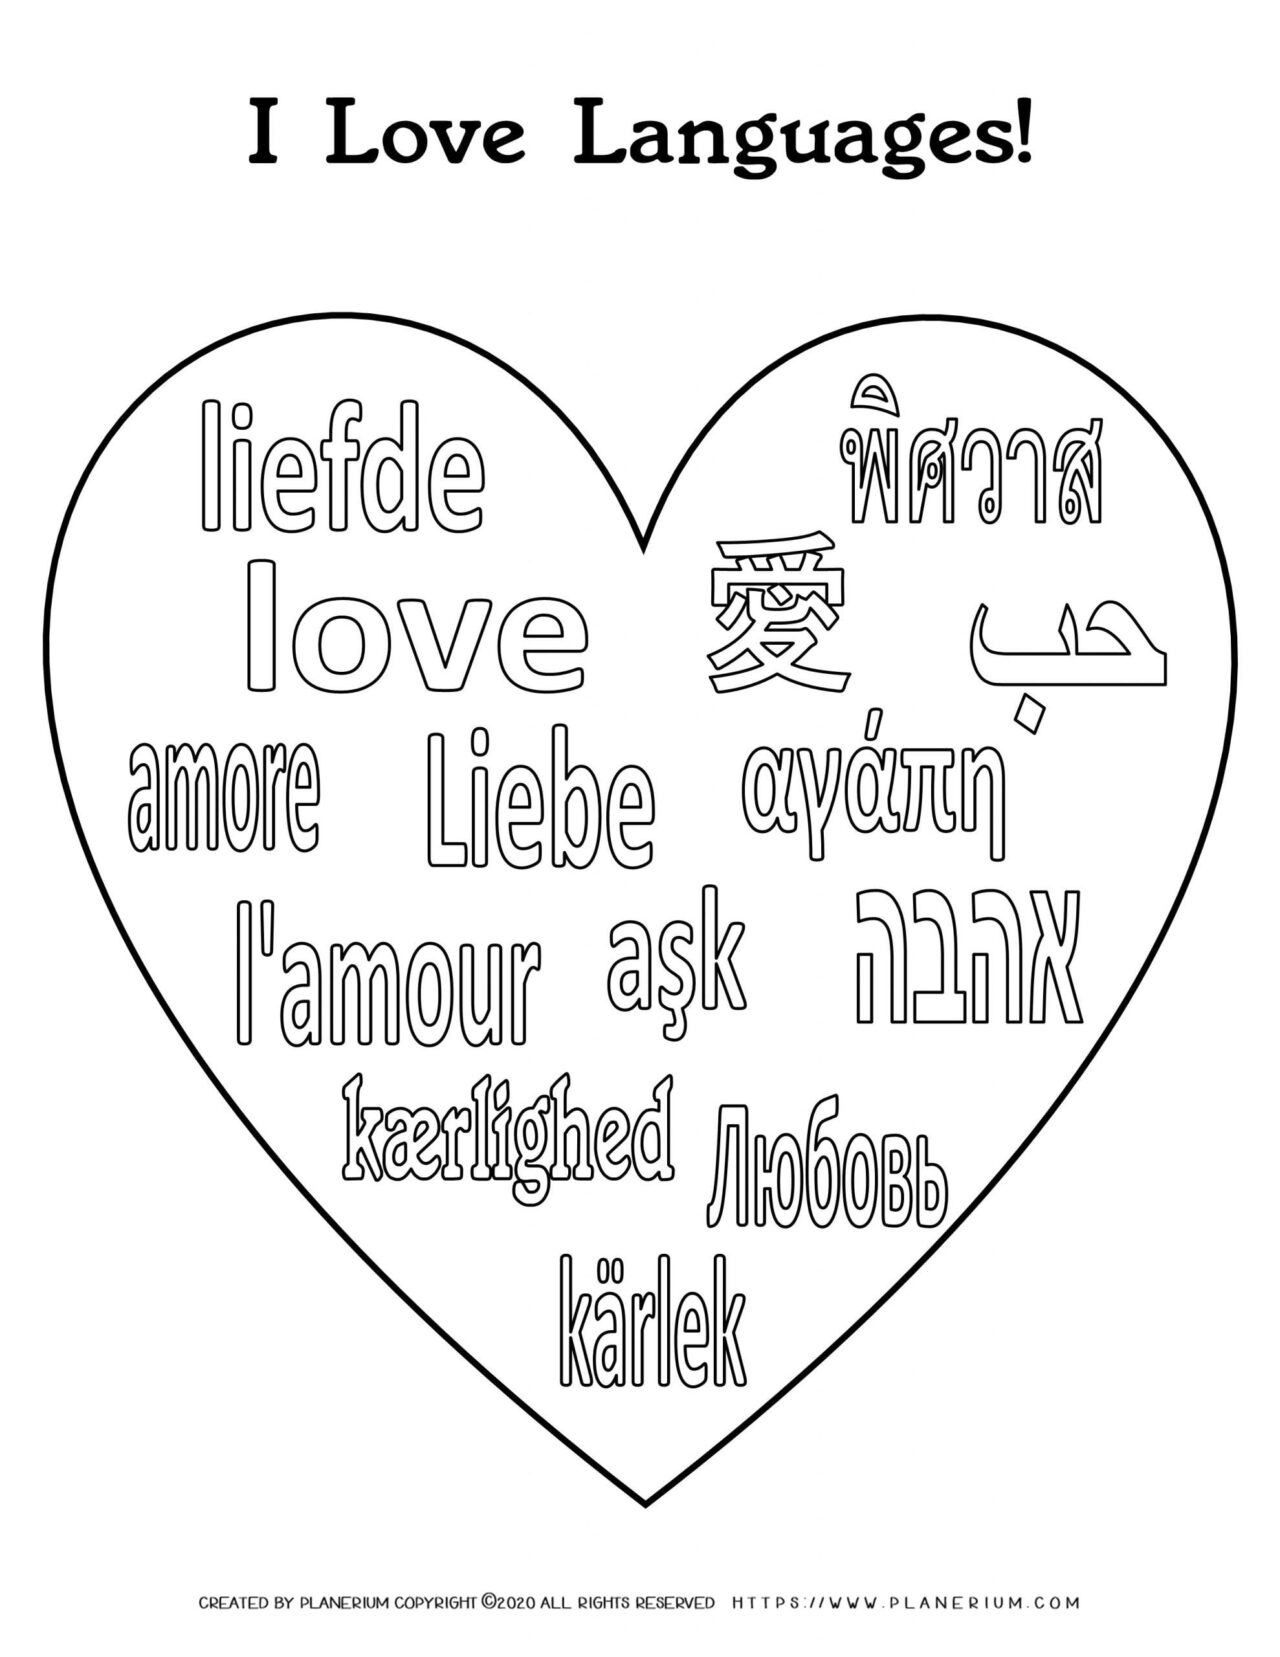 Valentines Day Coloring Page - I Love Languages